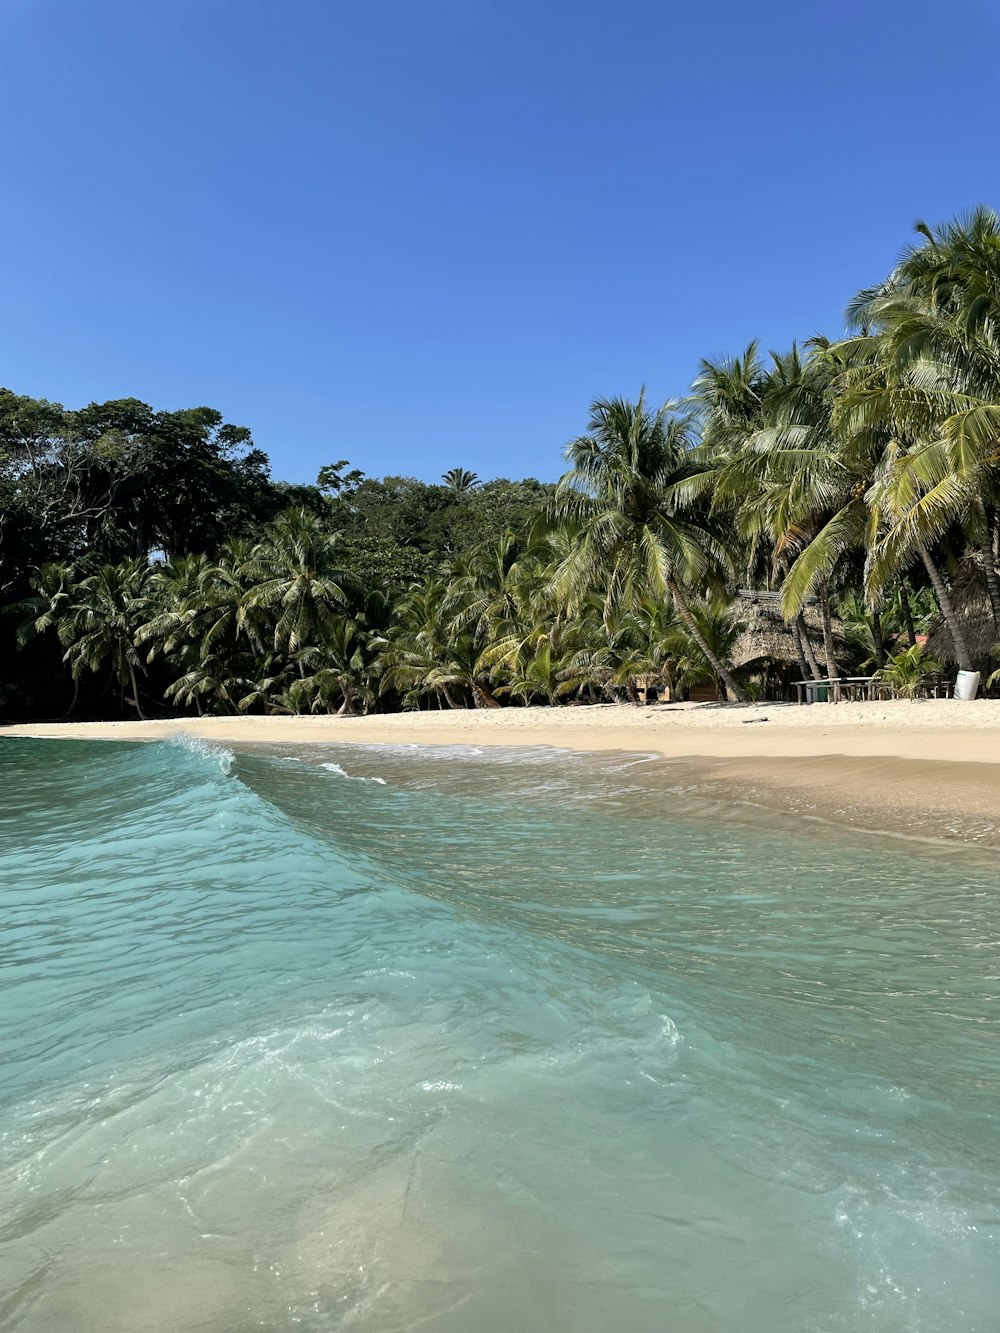 a sandy beach with palm trees and water